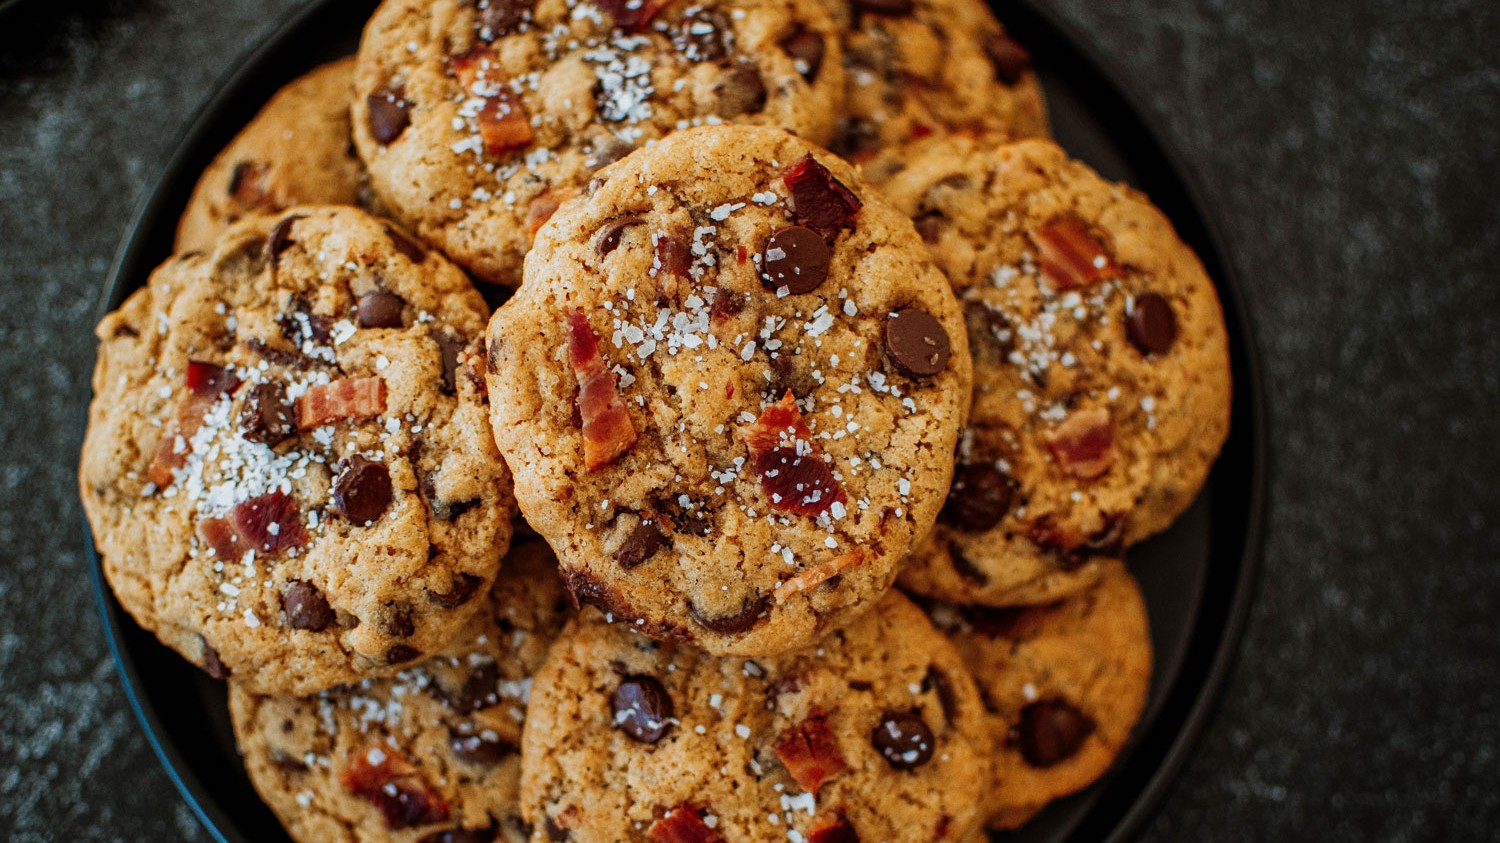 Image of Bacon Chocolate Chip Cookies